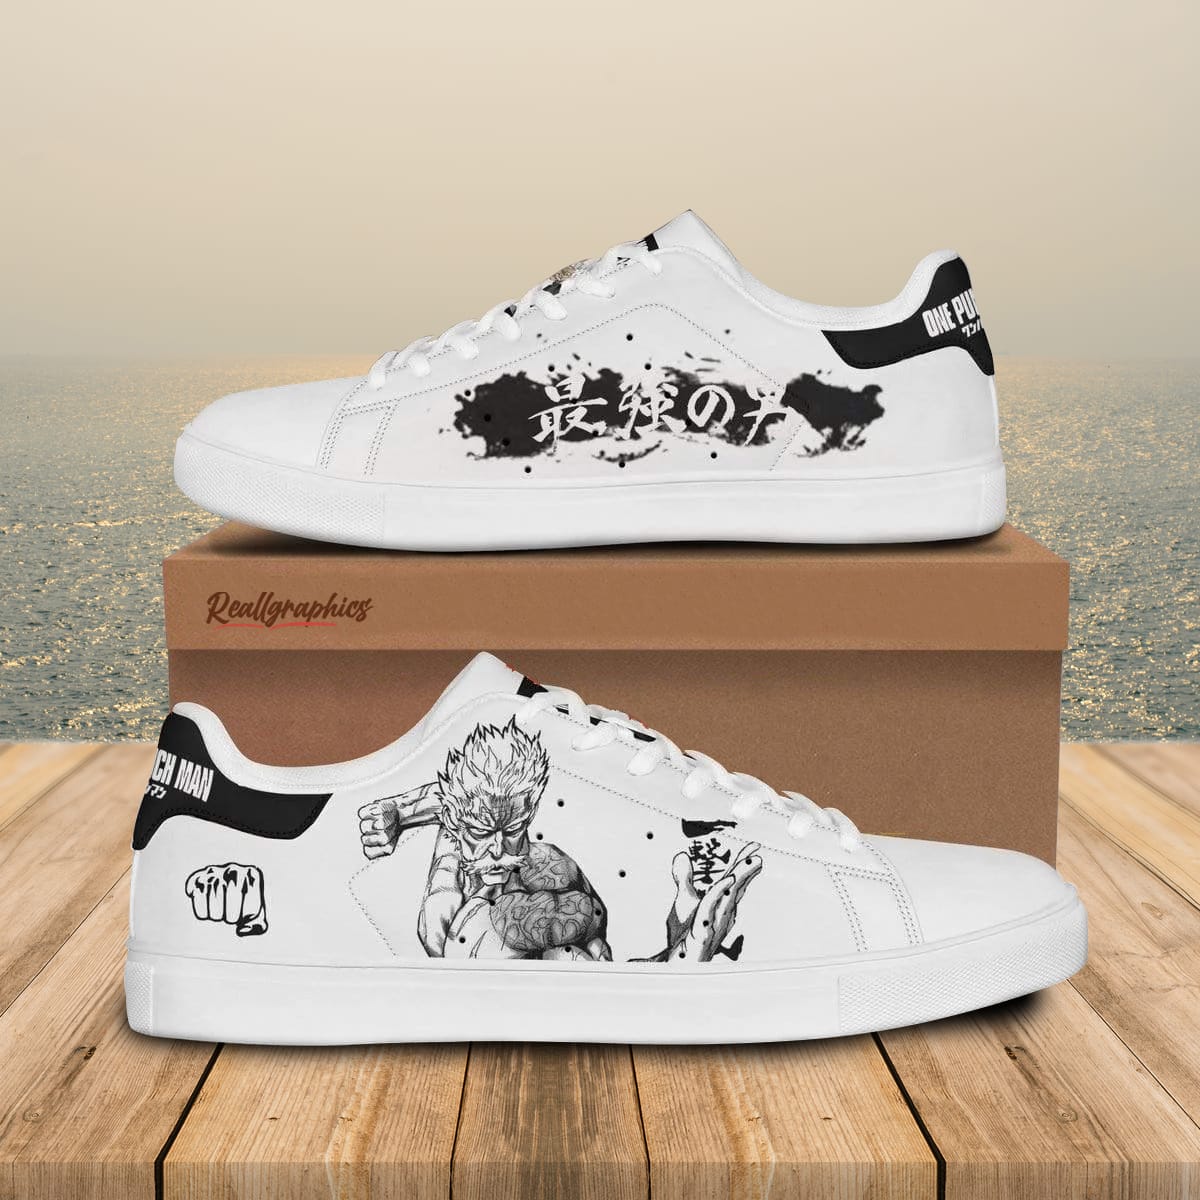 bang sneakers custom one punch man anime stan smith shoes